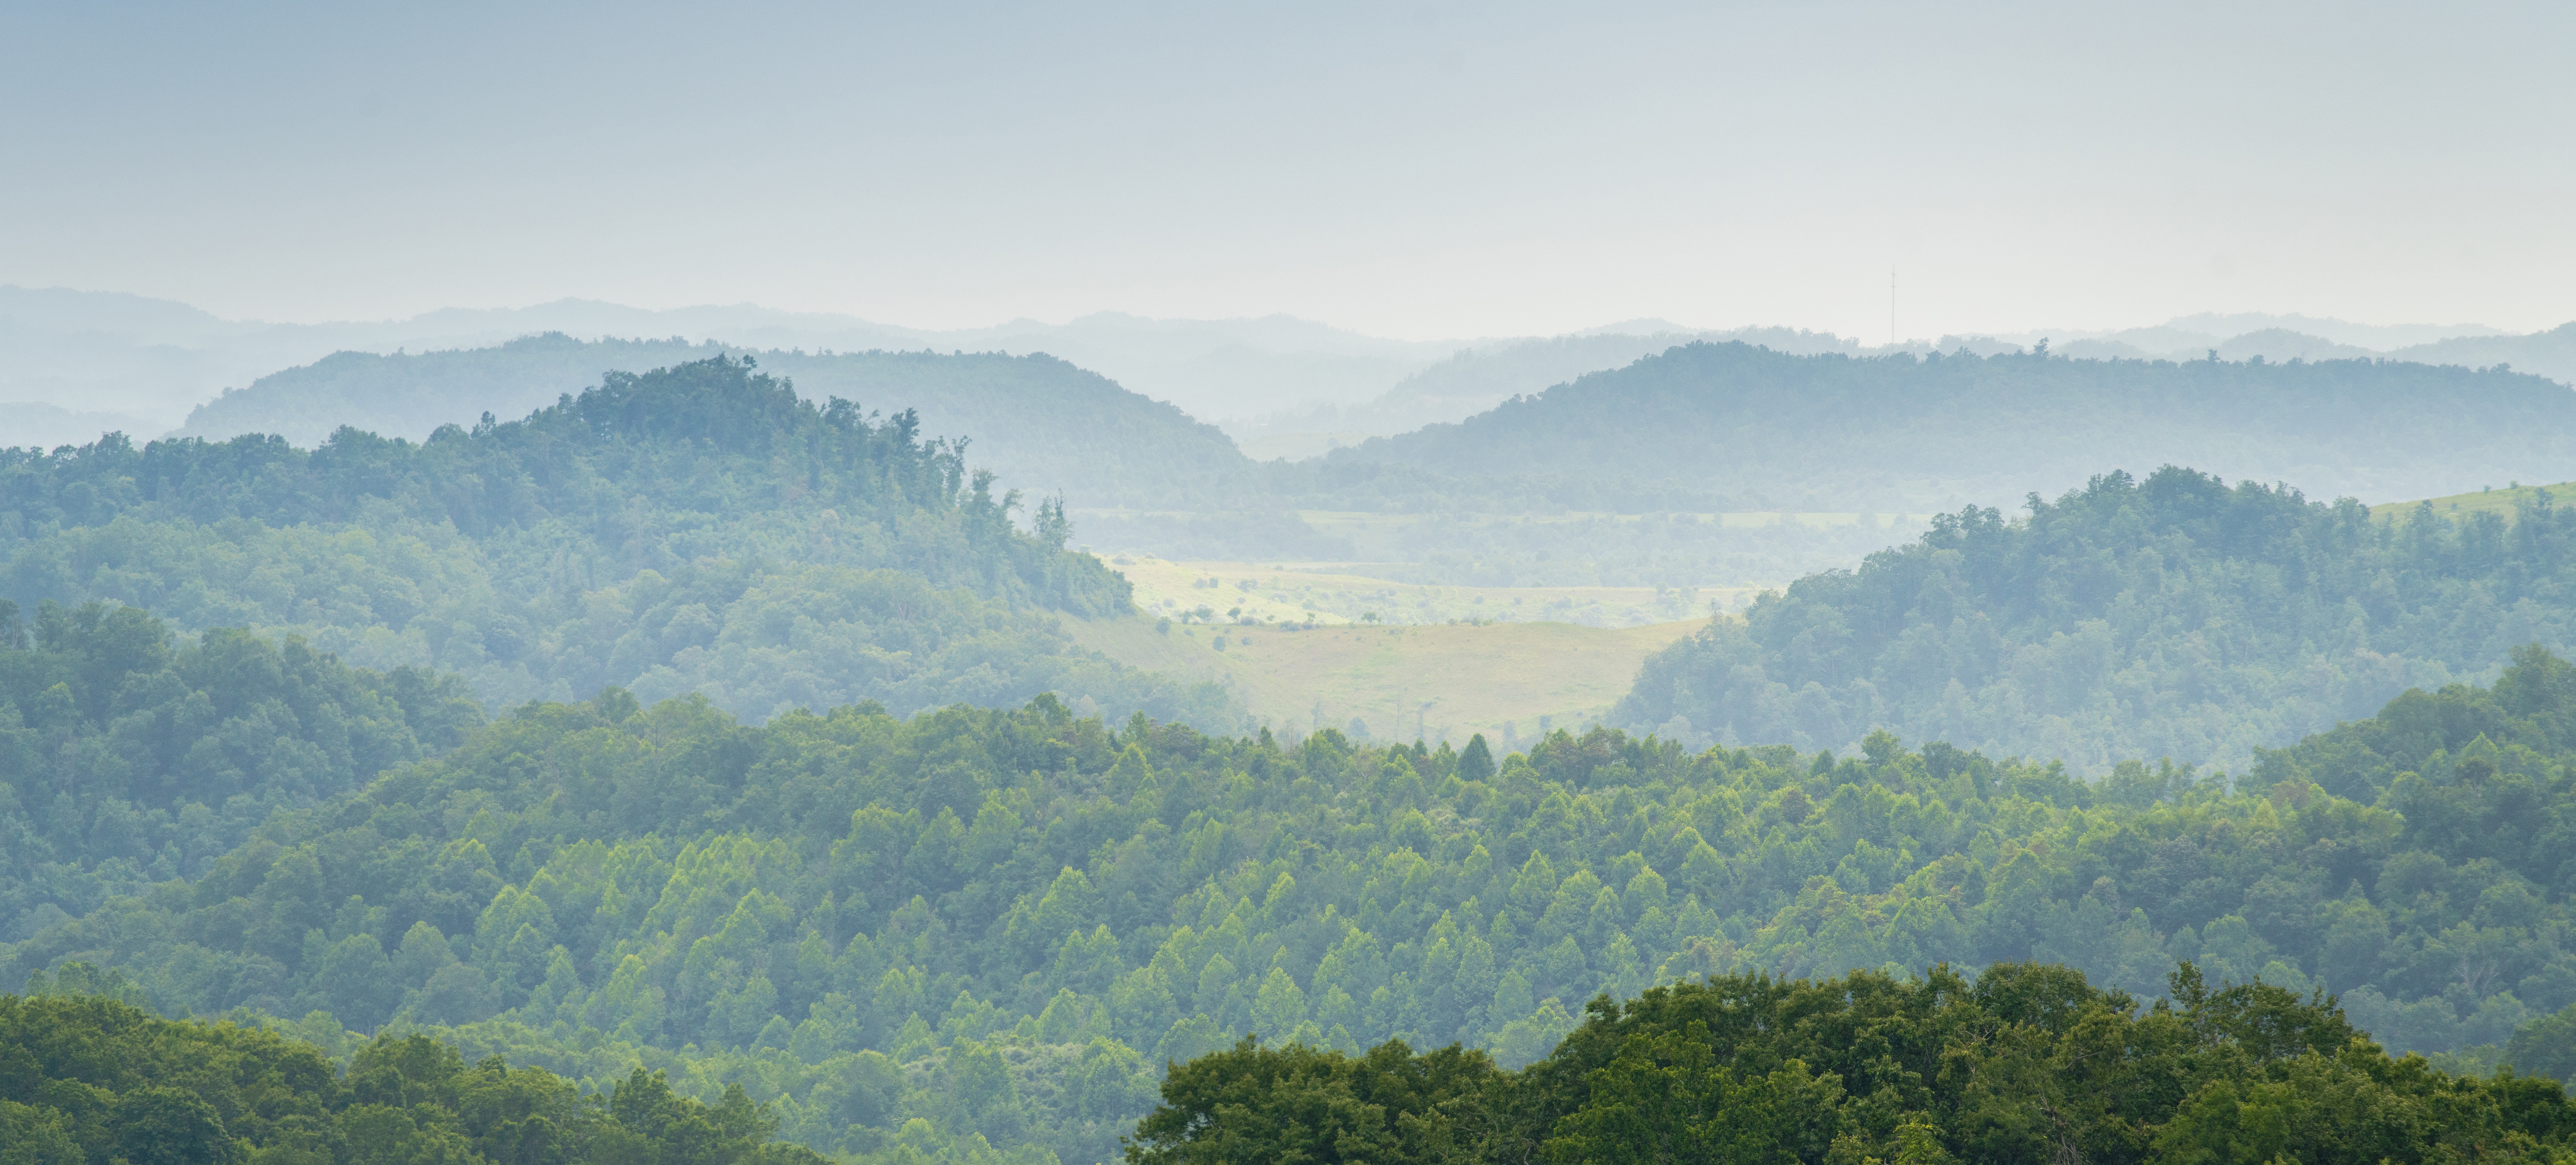 wide angle view of Appalachian mountain forests in Kentucky